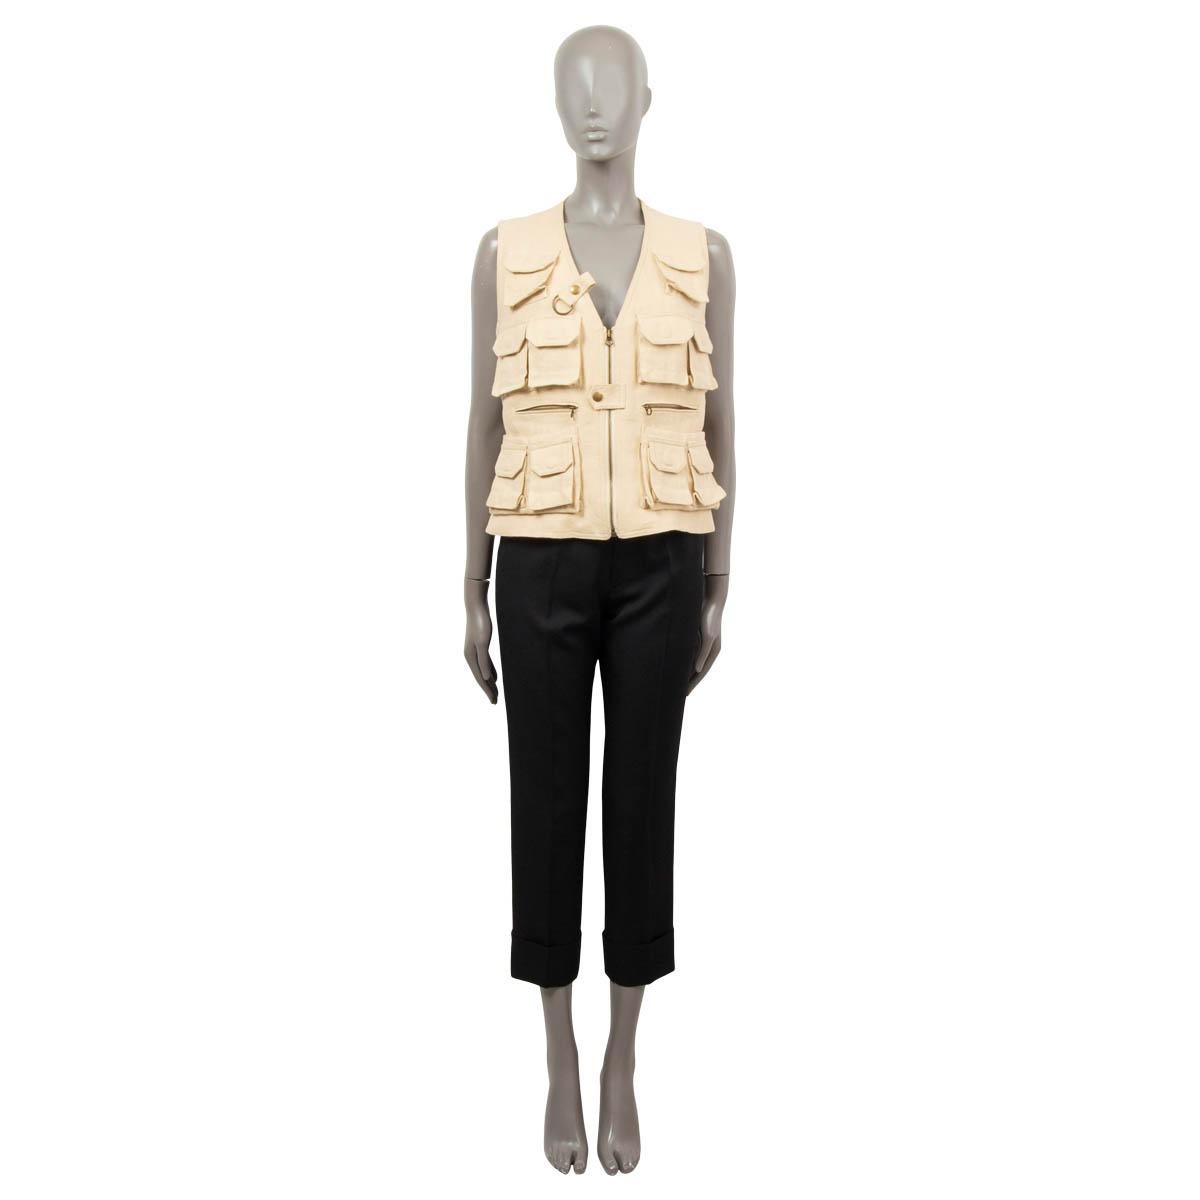 100% authentic Ralph Lauren fitted utility vest in beige linen (100%). Opens with a zipper at front and is equipped with ten push-button flap pockets, two zipper pockets and two slip pockets at front. Lined in beige cupro (100%). Has been worn and